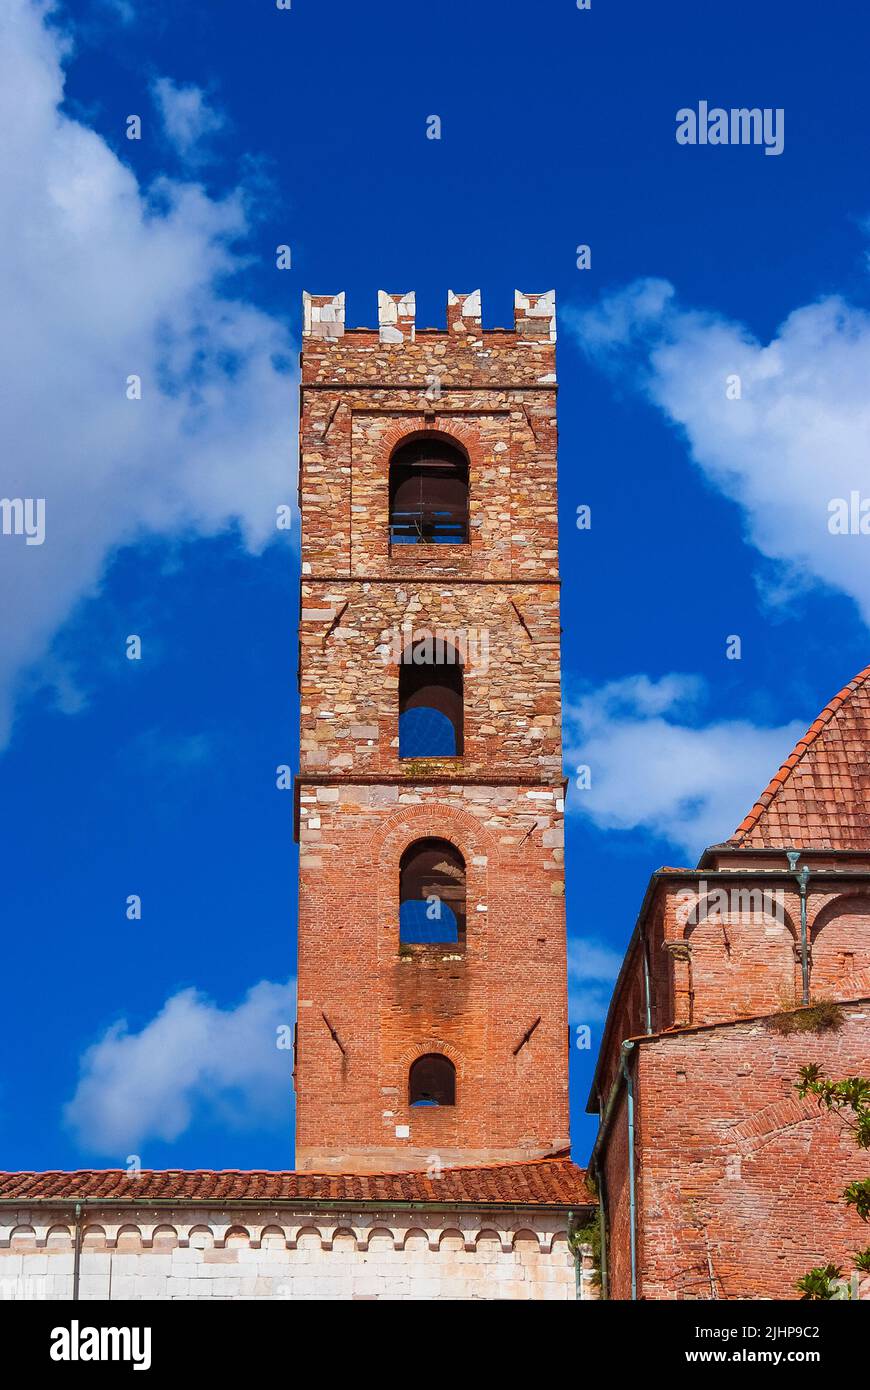 Church of Ss John and Reparata ancient belfry in the shape of medieval tower among clouds Stock Photo